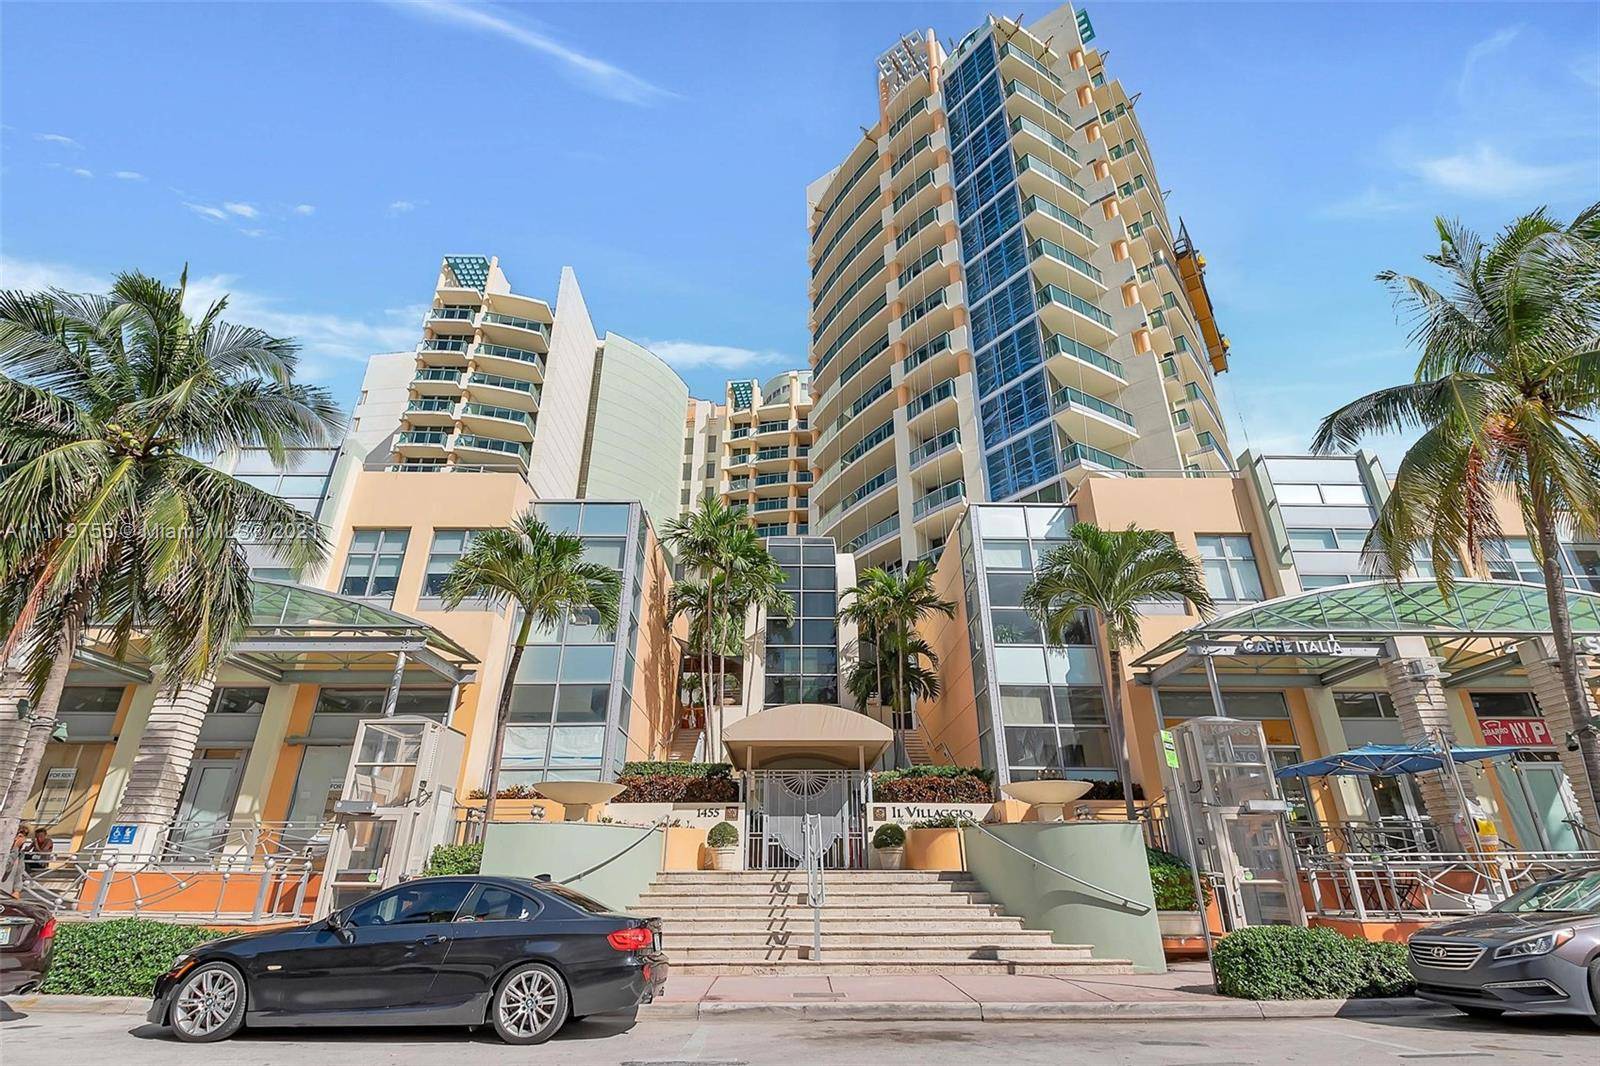 Introducing this rare commercial opportunity in The Shoppes of Il Villaggio on Ocean Drive, conveniently located one block off Collins Ave A1A, adjacent to Lummus Park and the Art Deco ...